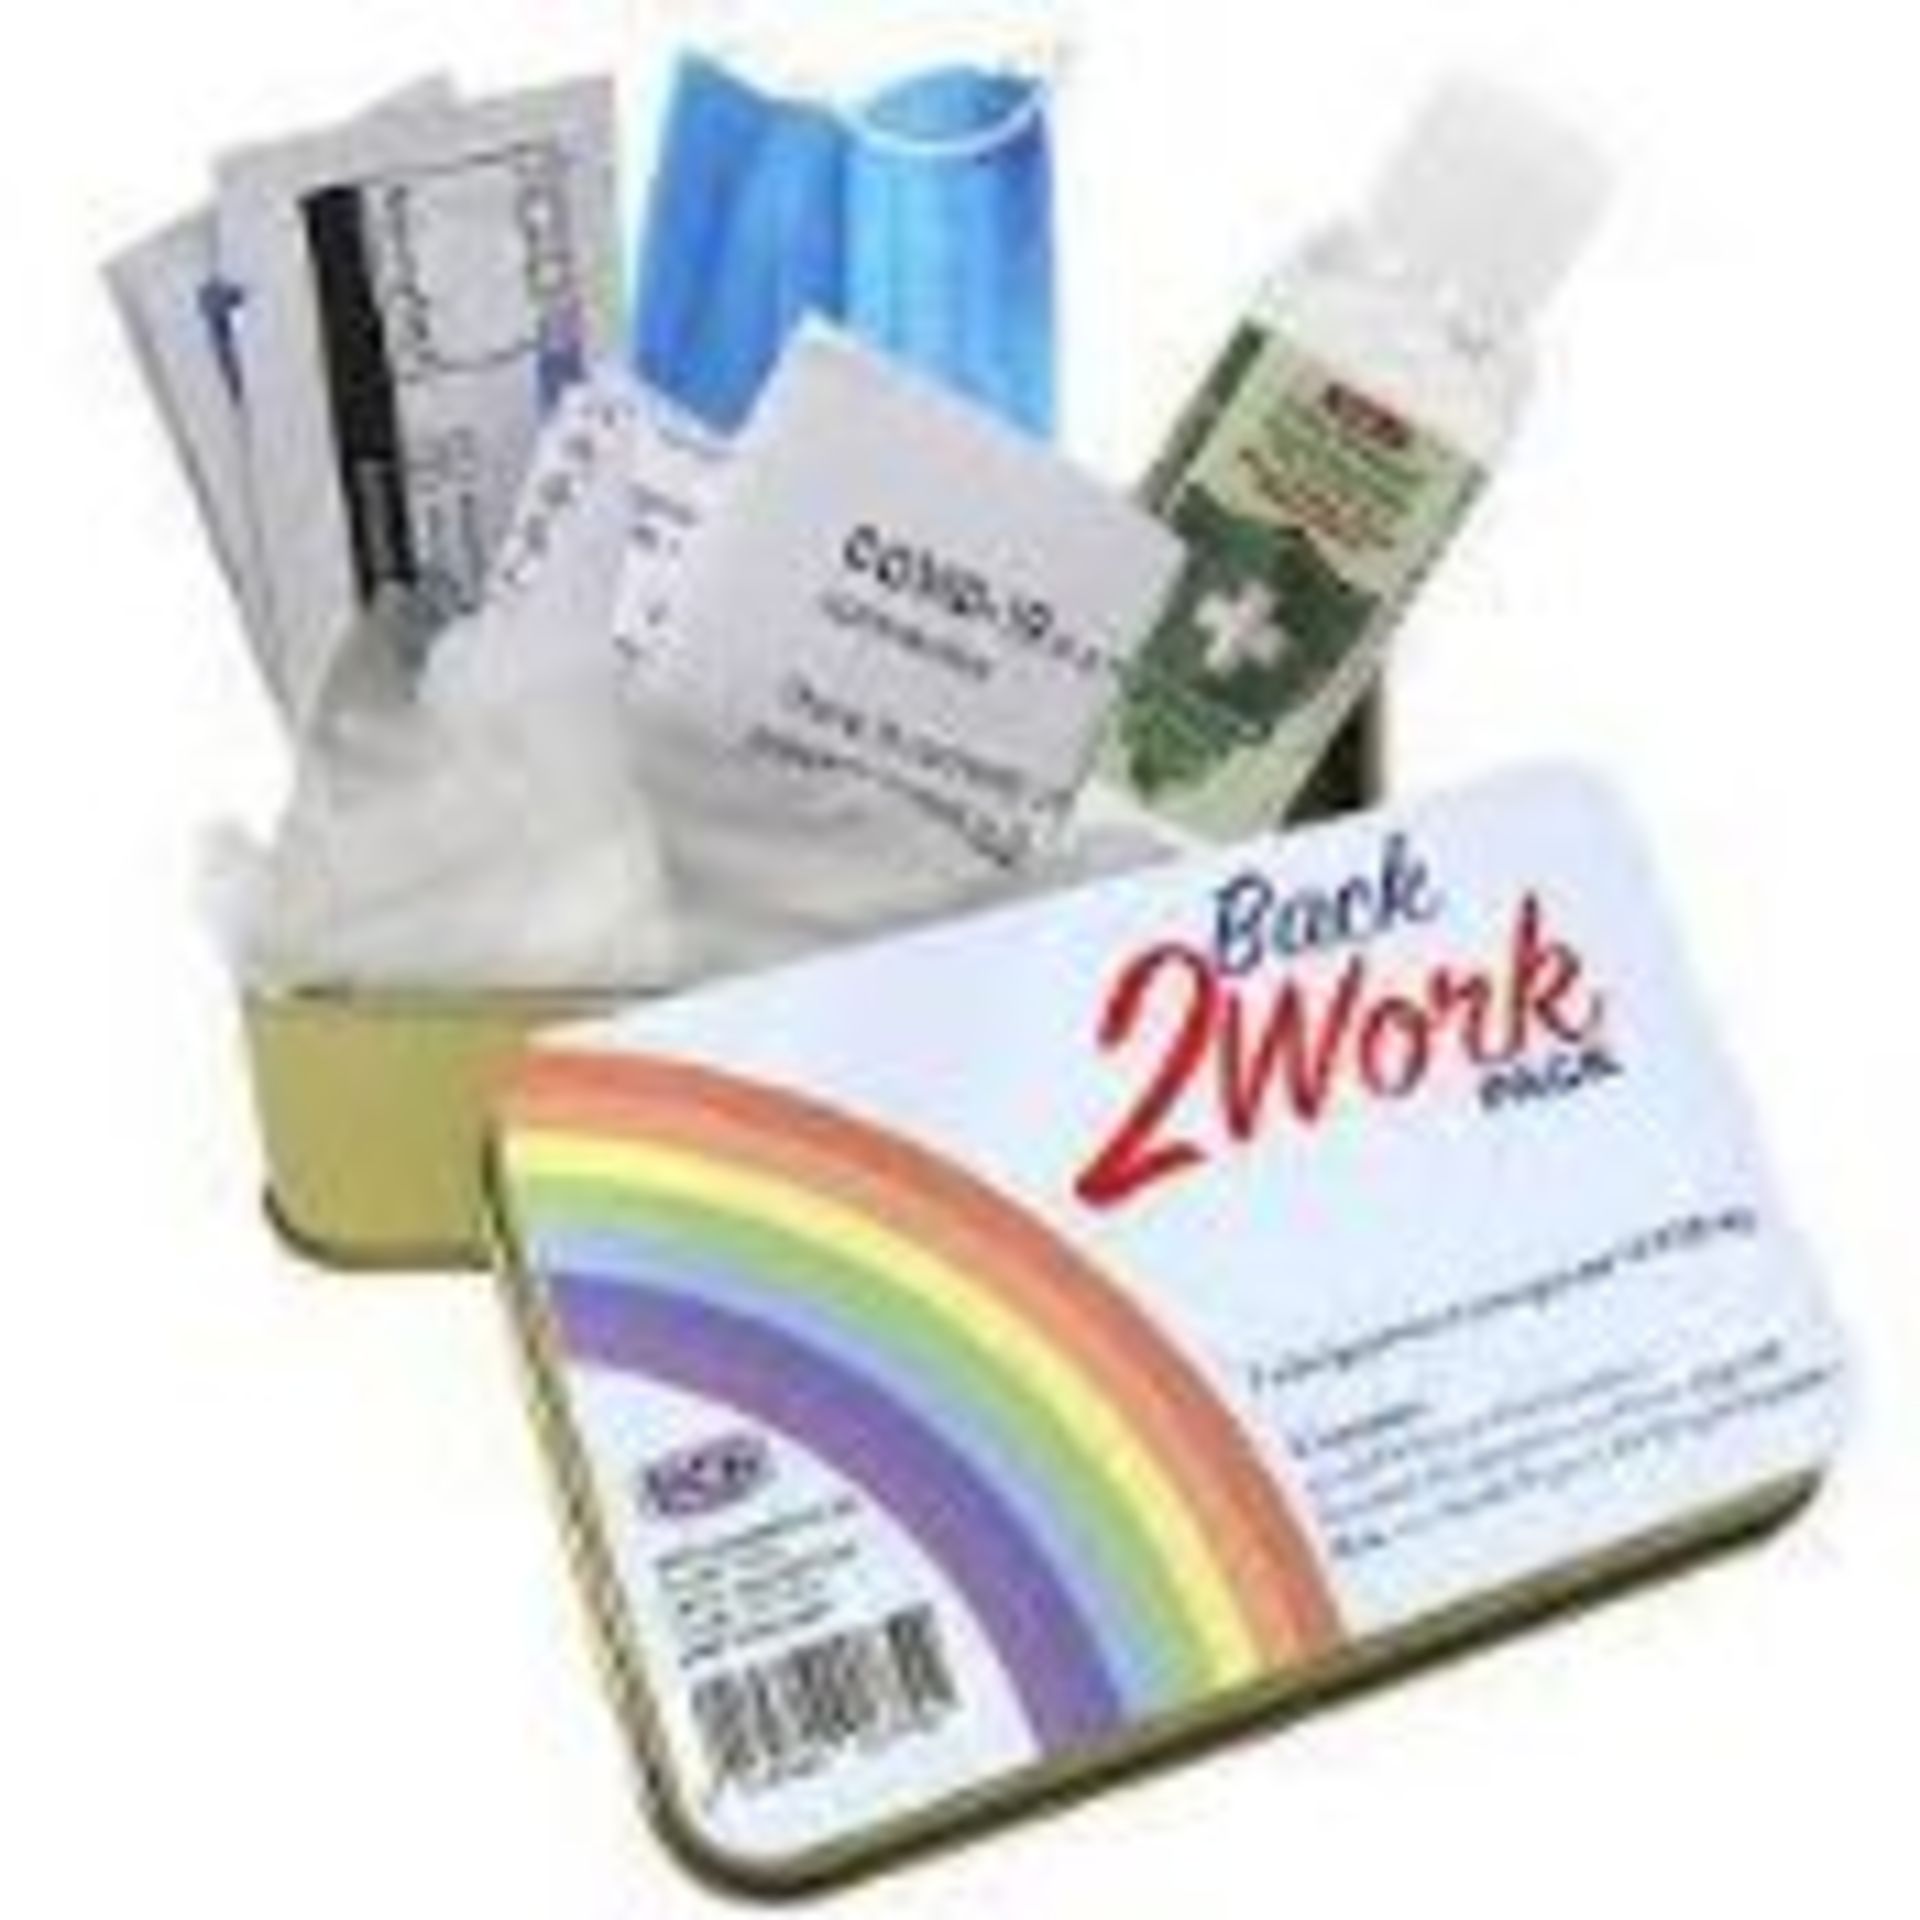 TRADE LOT 400 X NEW PACKAGED RETURN 2 WORK KITS. INCLUDES: GLOVES, SANITISER & MORE. RRP £9.99 EACH.